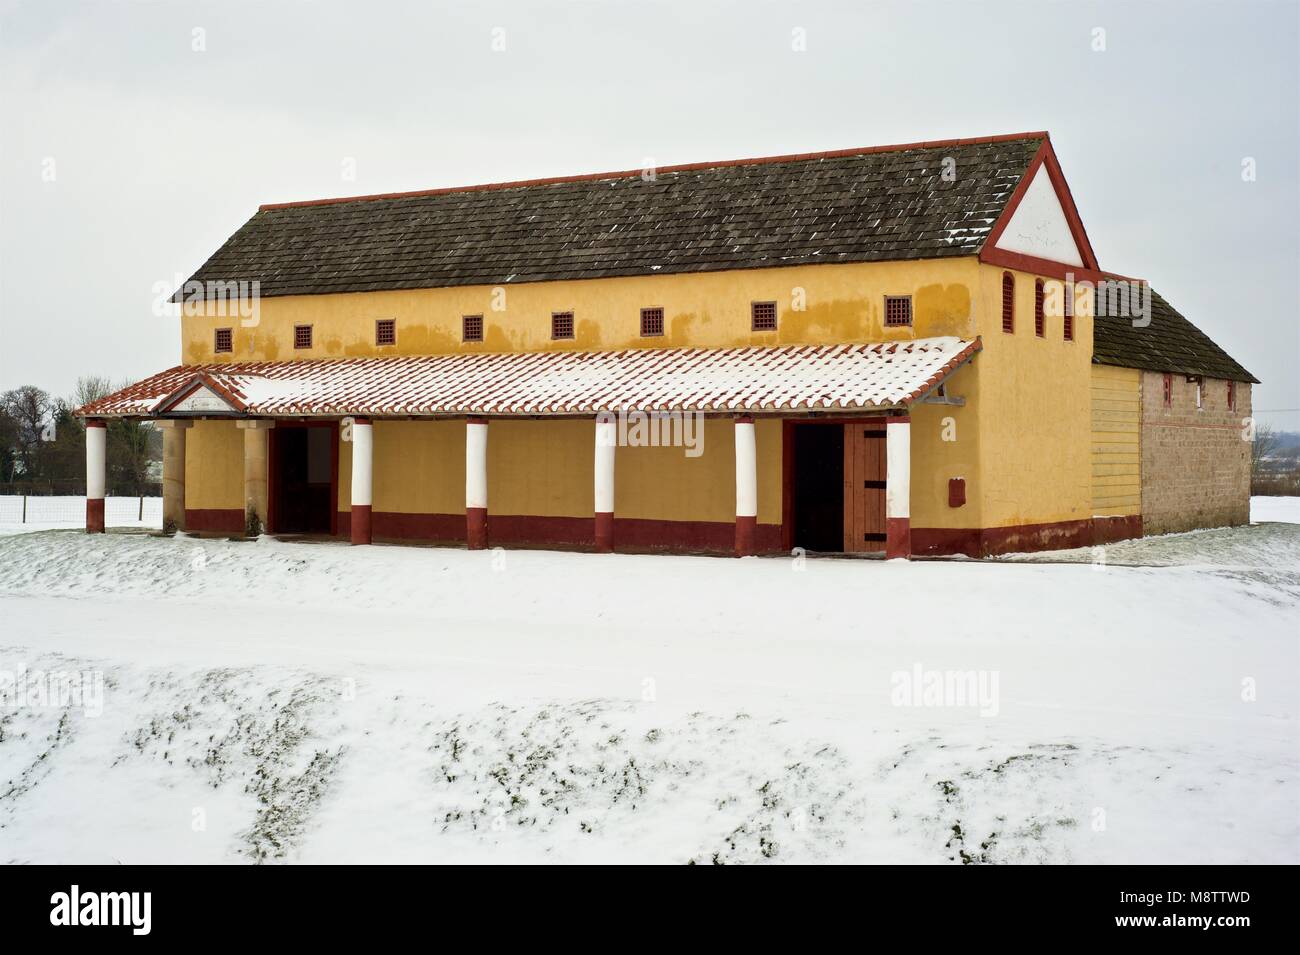 Wroxeter Roman villa in Shropshire England. Reconstructed Roman House in the snow. Stock Photo